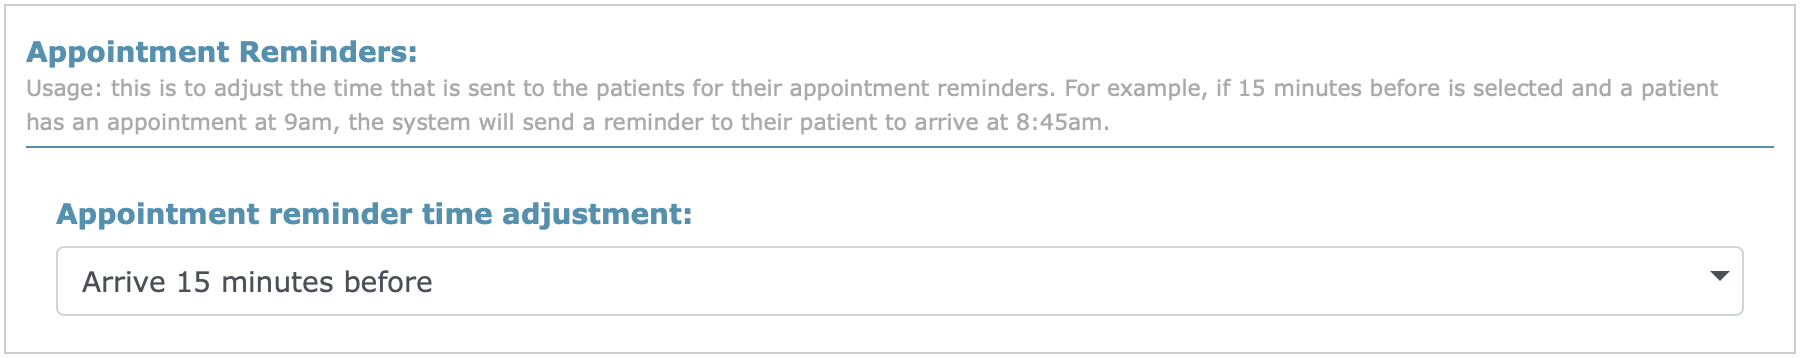 Appointment_Adjustment.png